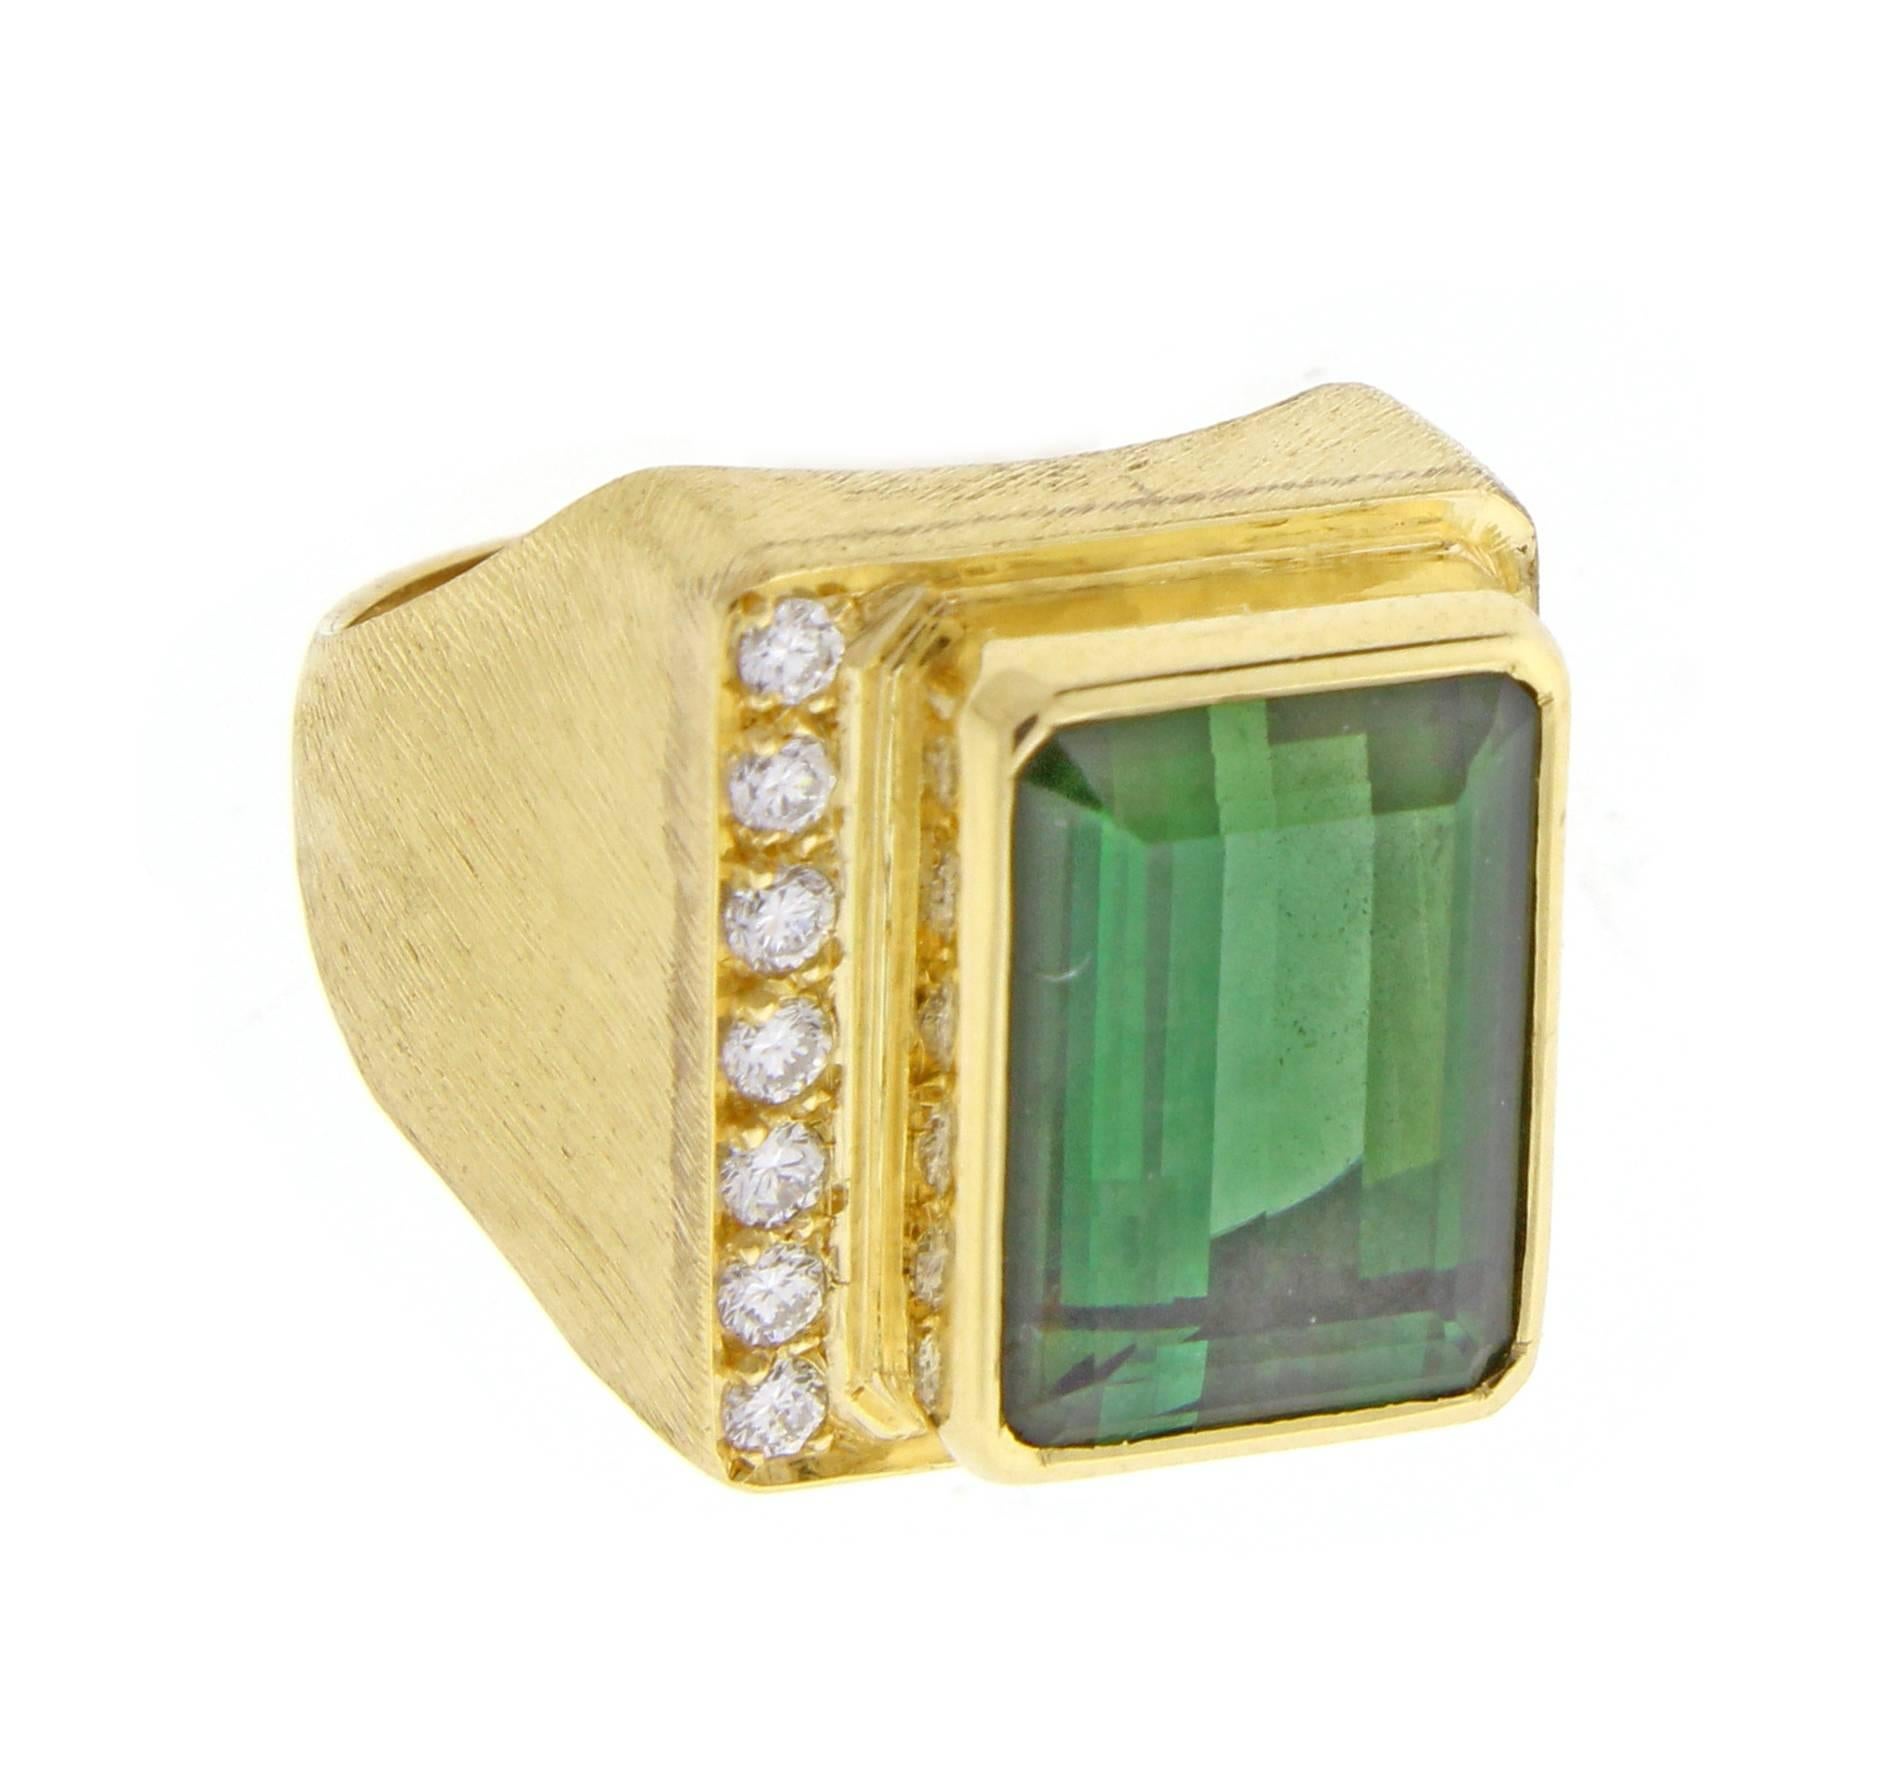 Emerald cut tourmaline and diamond ring by world renowned Brazilian jeweler Haroldo Burle Marx (1911-1991). The ring features a bezel set 12.5*9mm tourmaline and 7 diamonds weighing approximately .15 carats set in a brushed 18 karat gold setting.